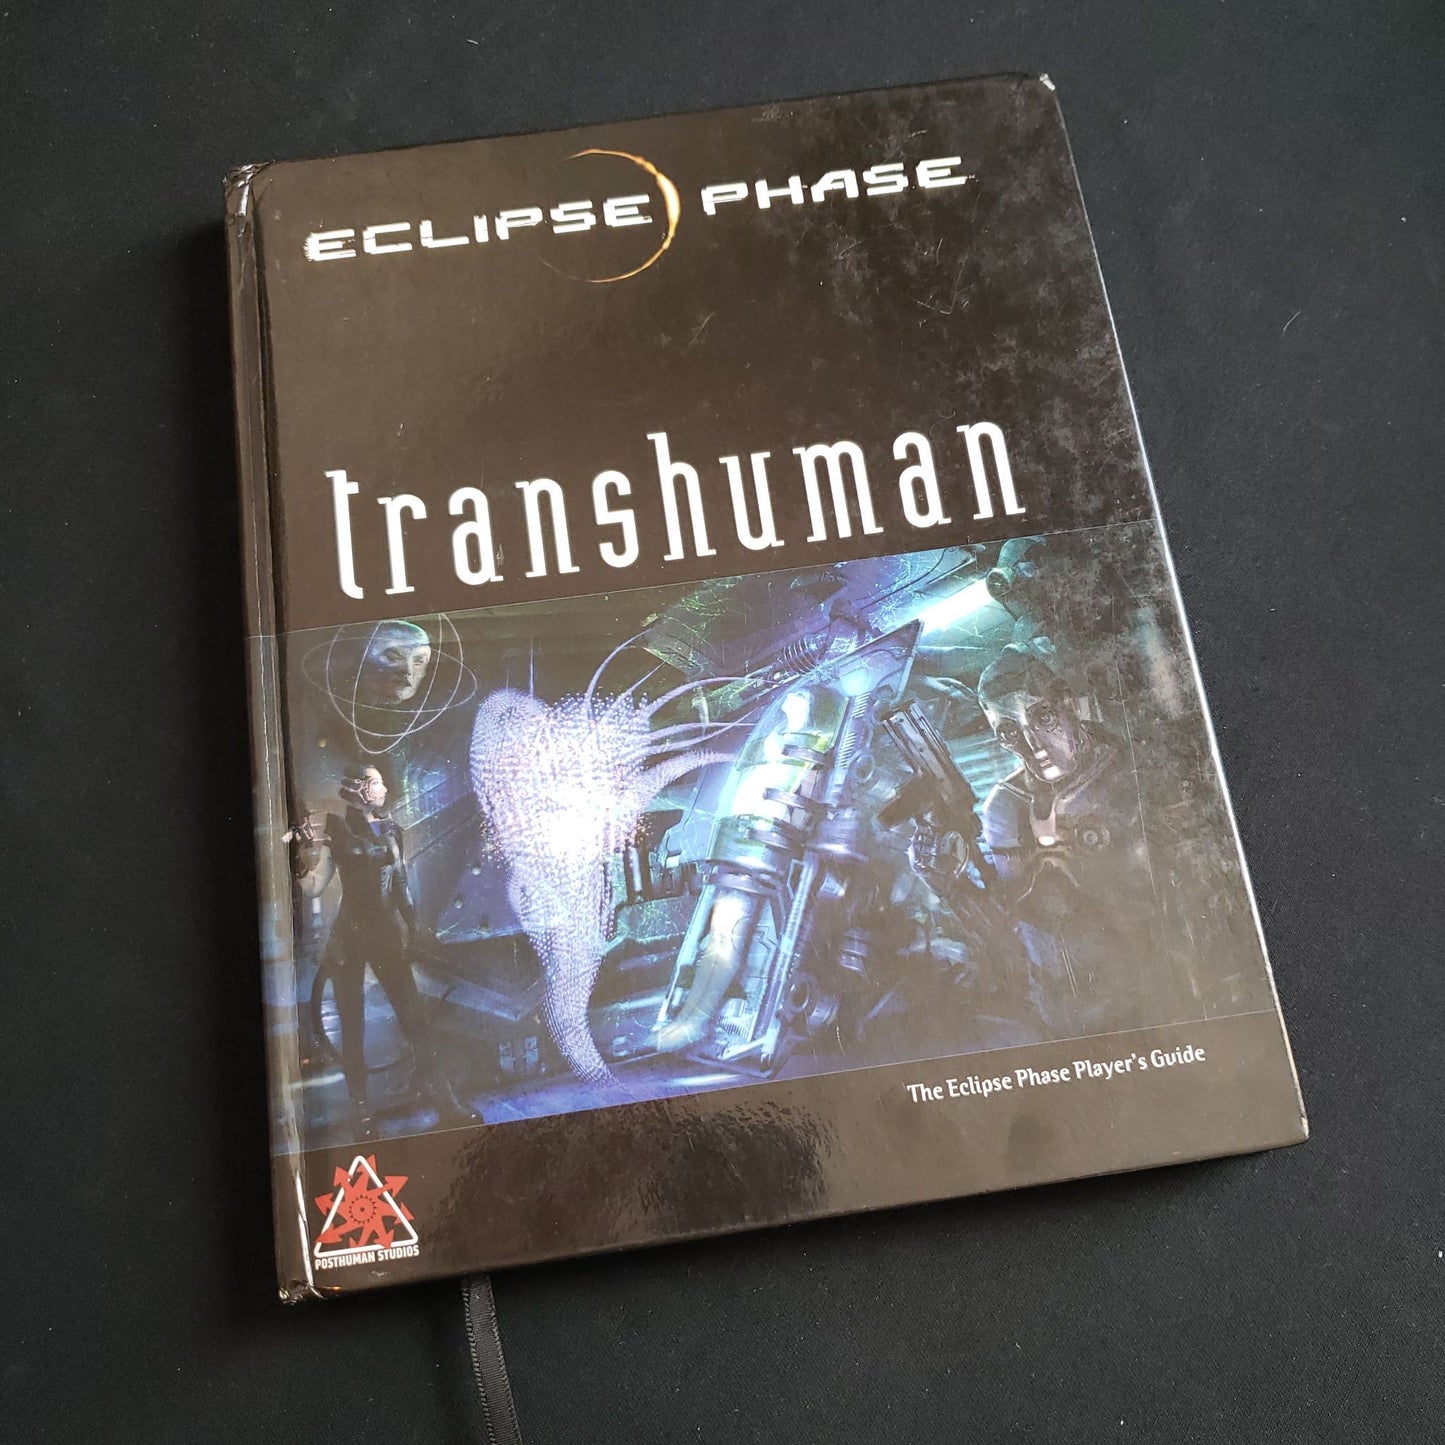 Image shows the front cover of the Transhuman book for the Eclipse Phase roleplaying game